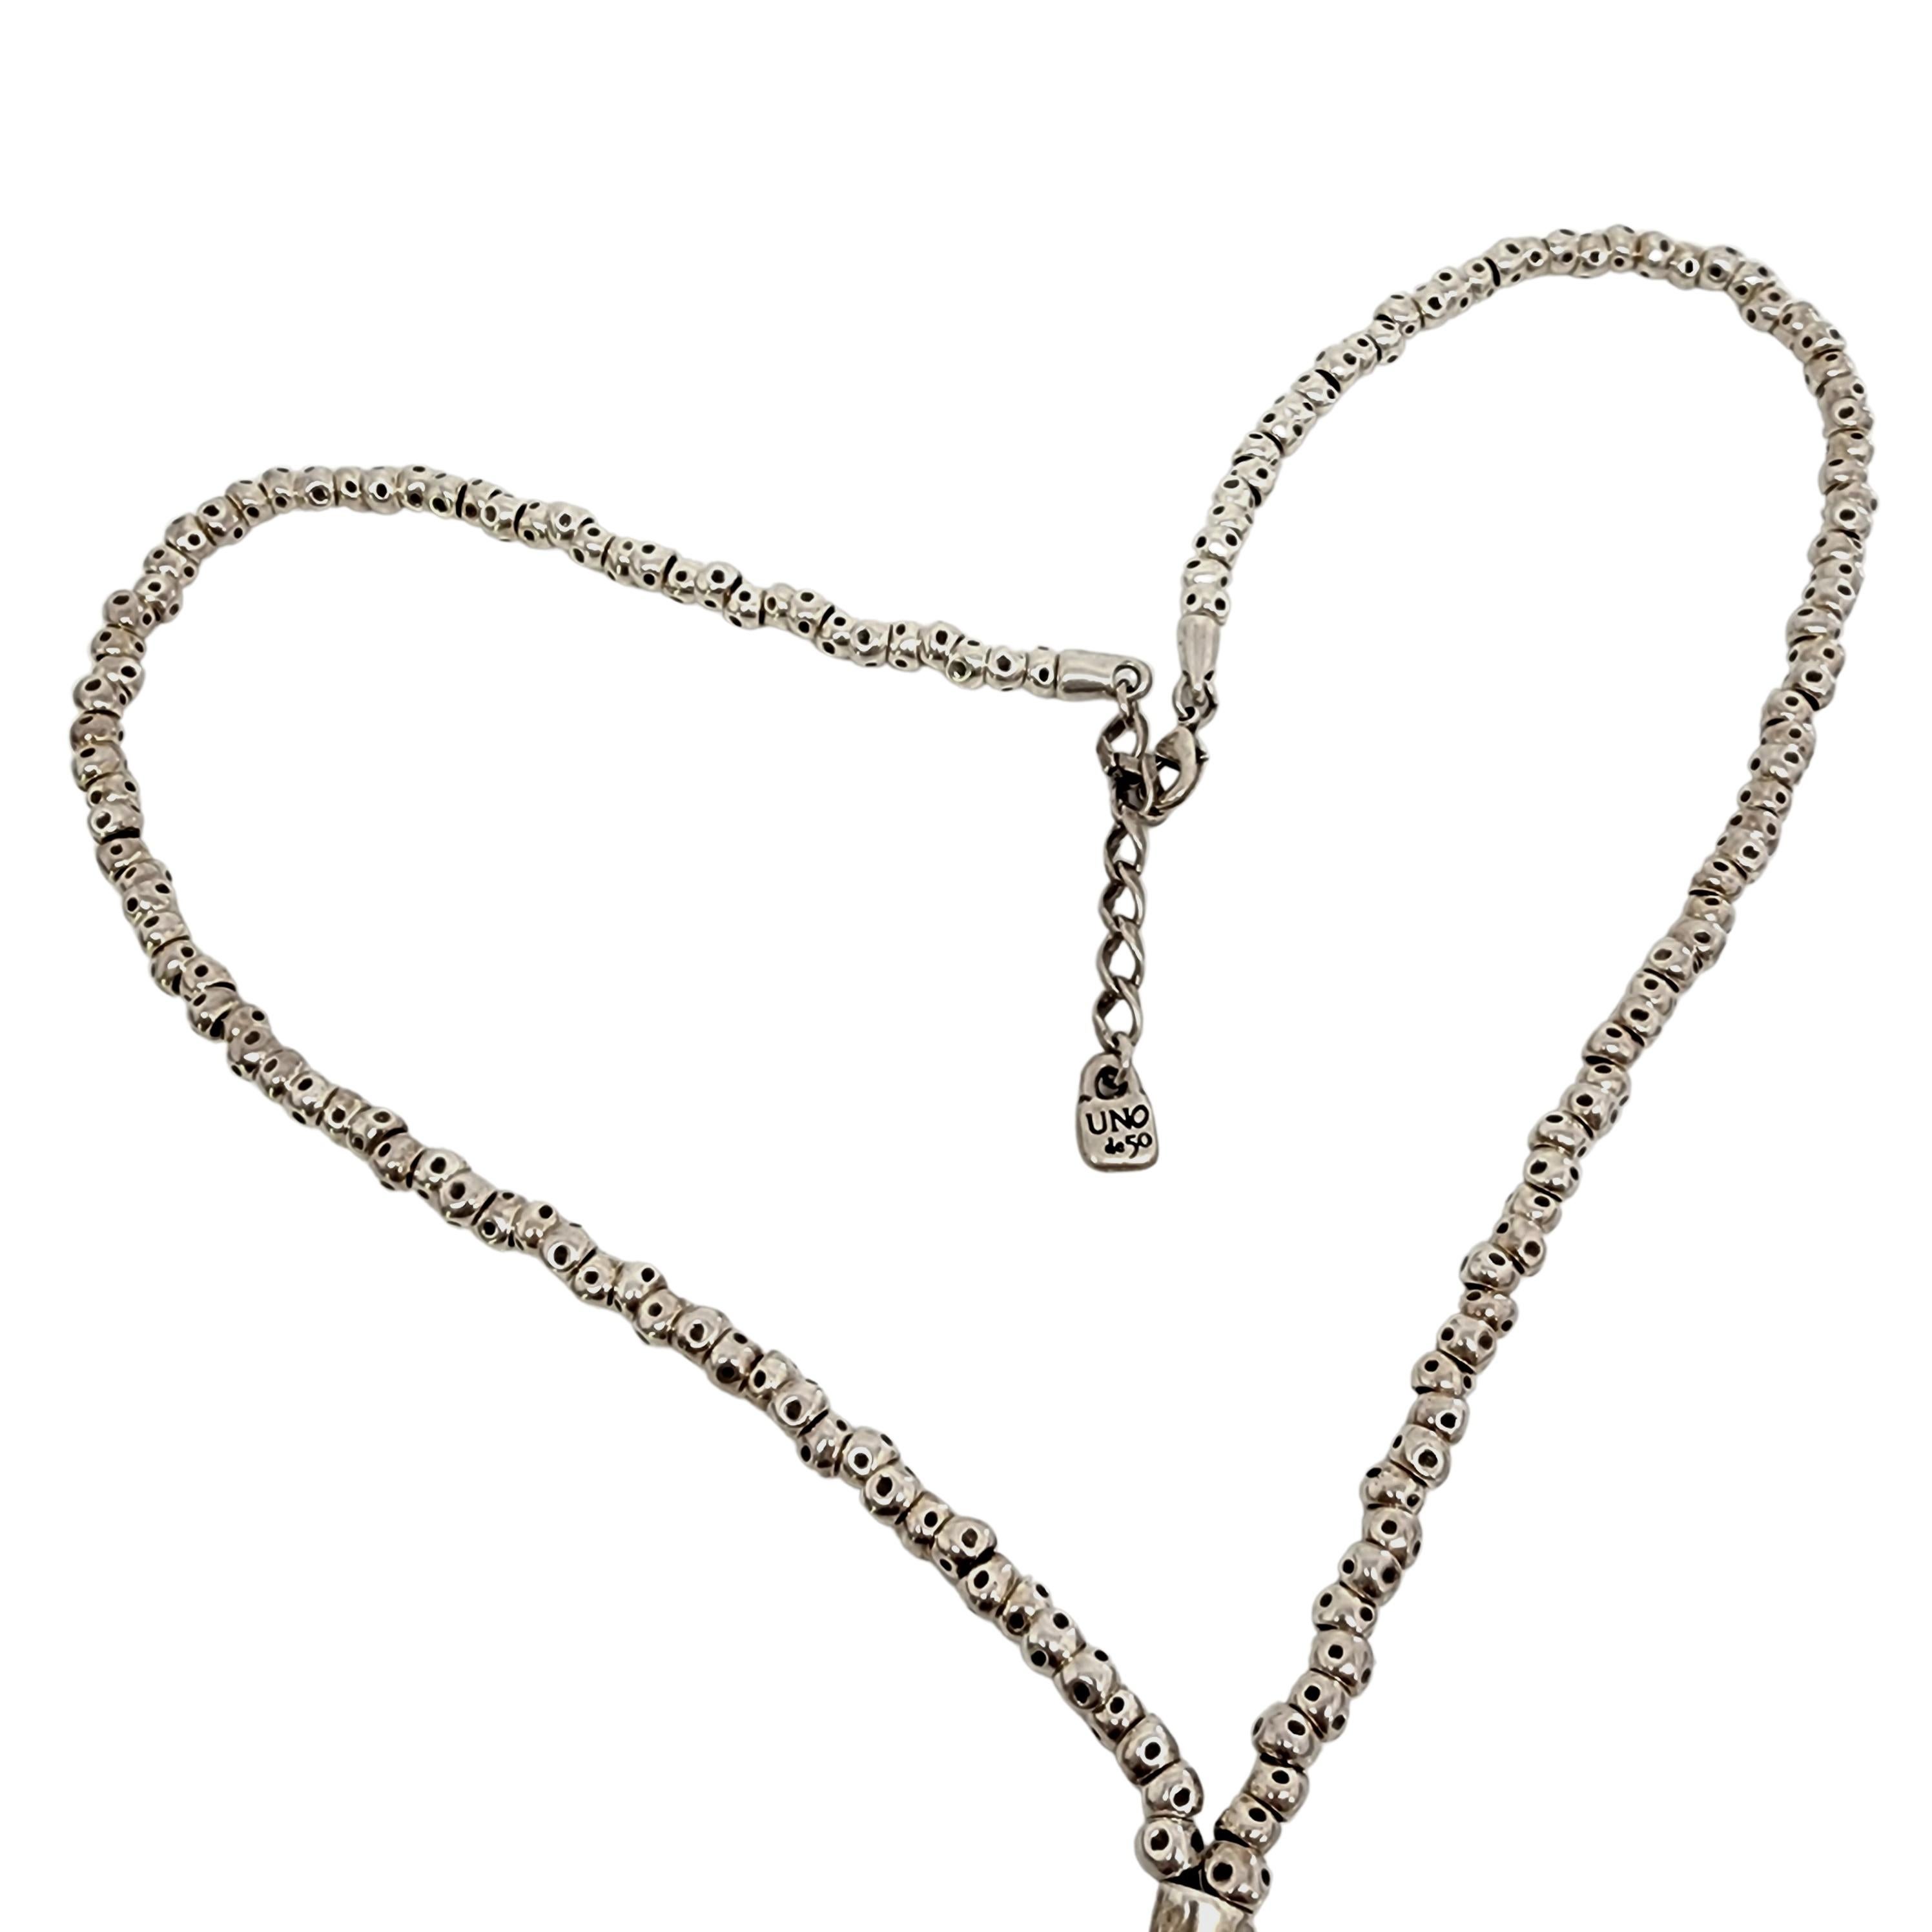 Uno de 50 All Balls Silver Plated Necklace #12790 In Good Condition For Sale In Washington Depot, CT